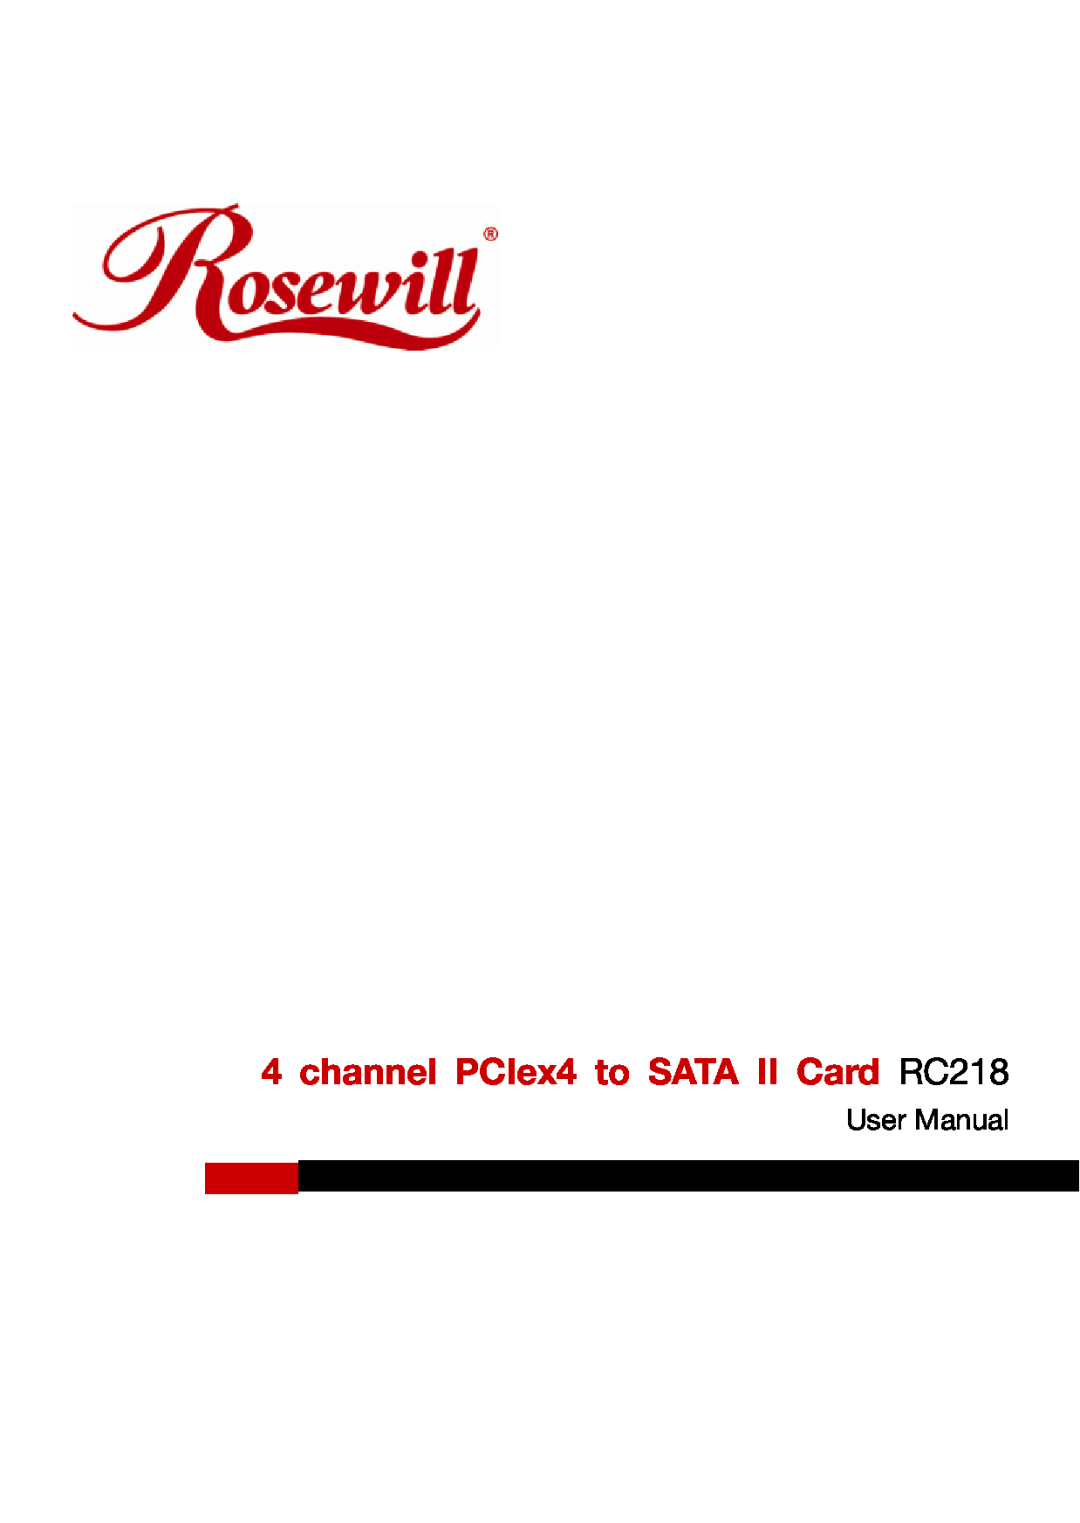 Rosewill user manual channel PCIex4 to SATA II Card RC218 